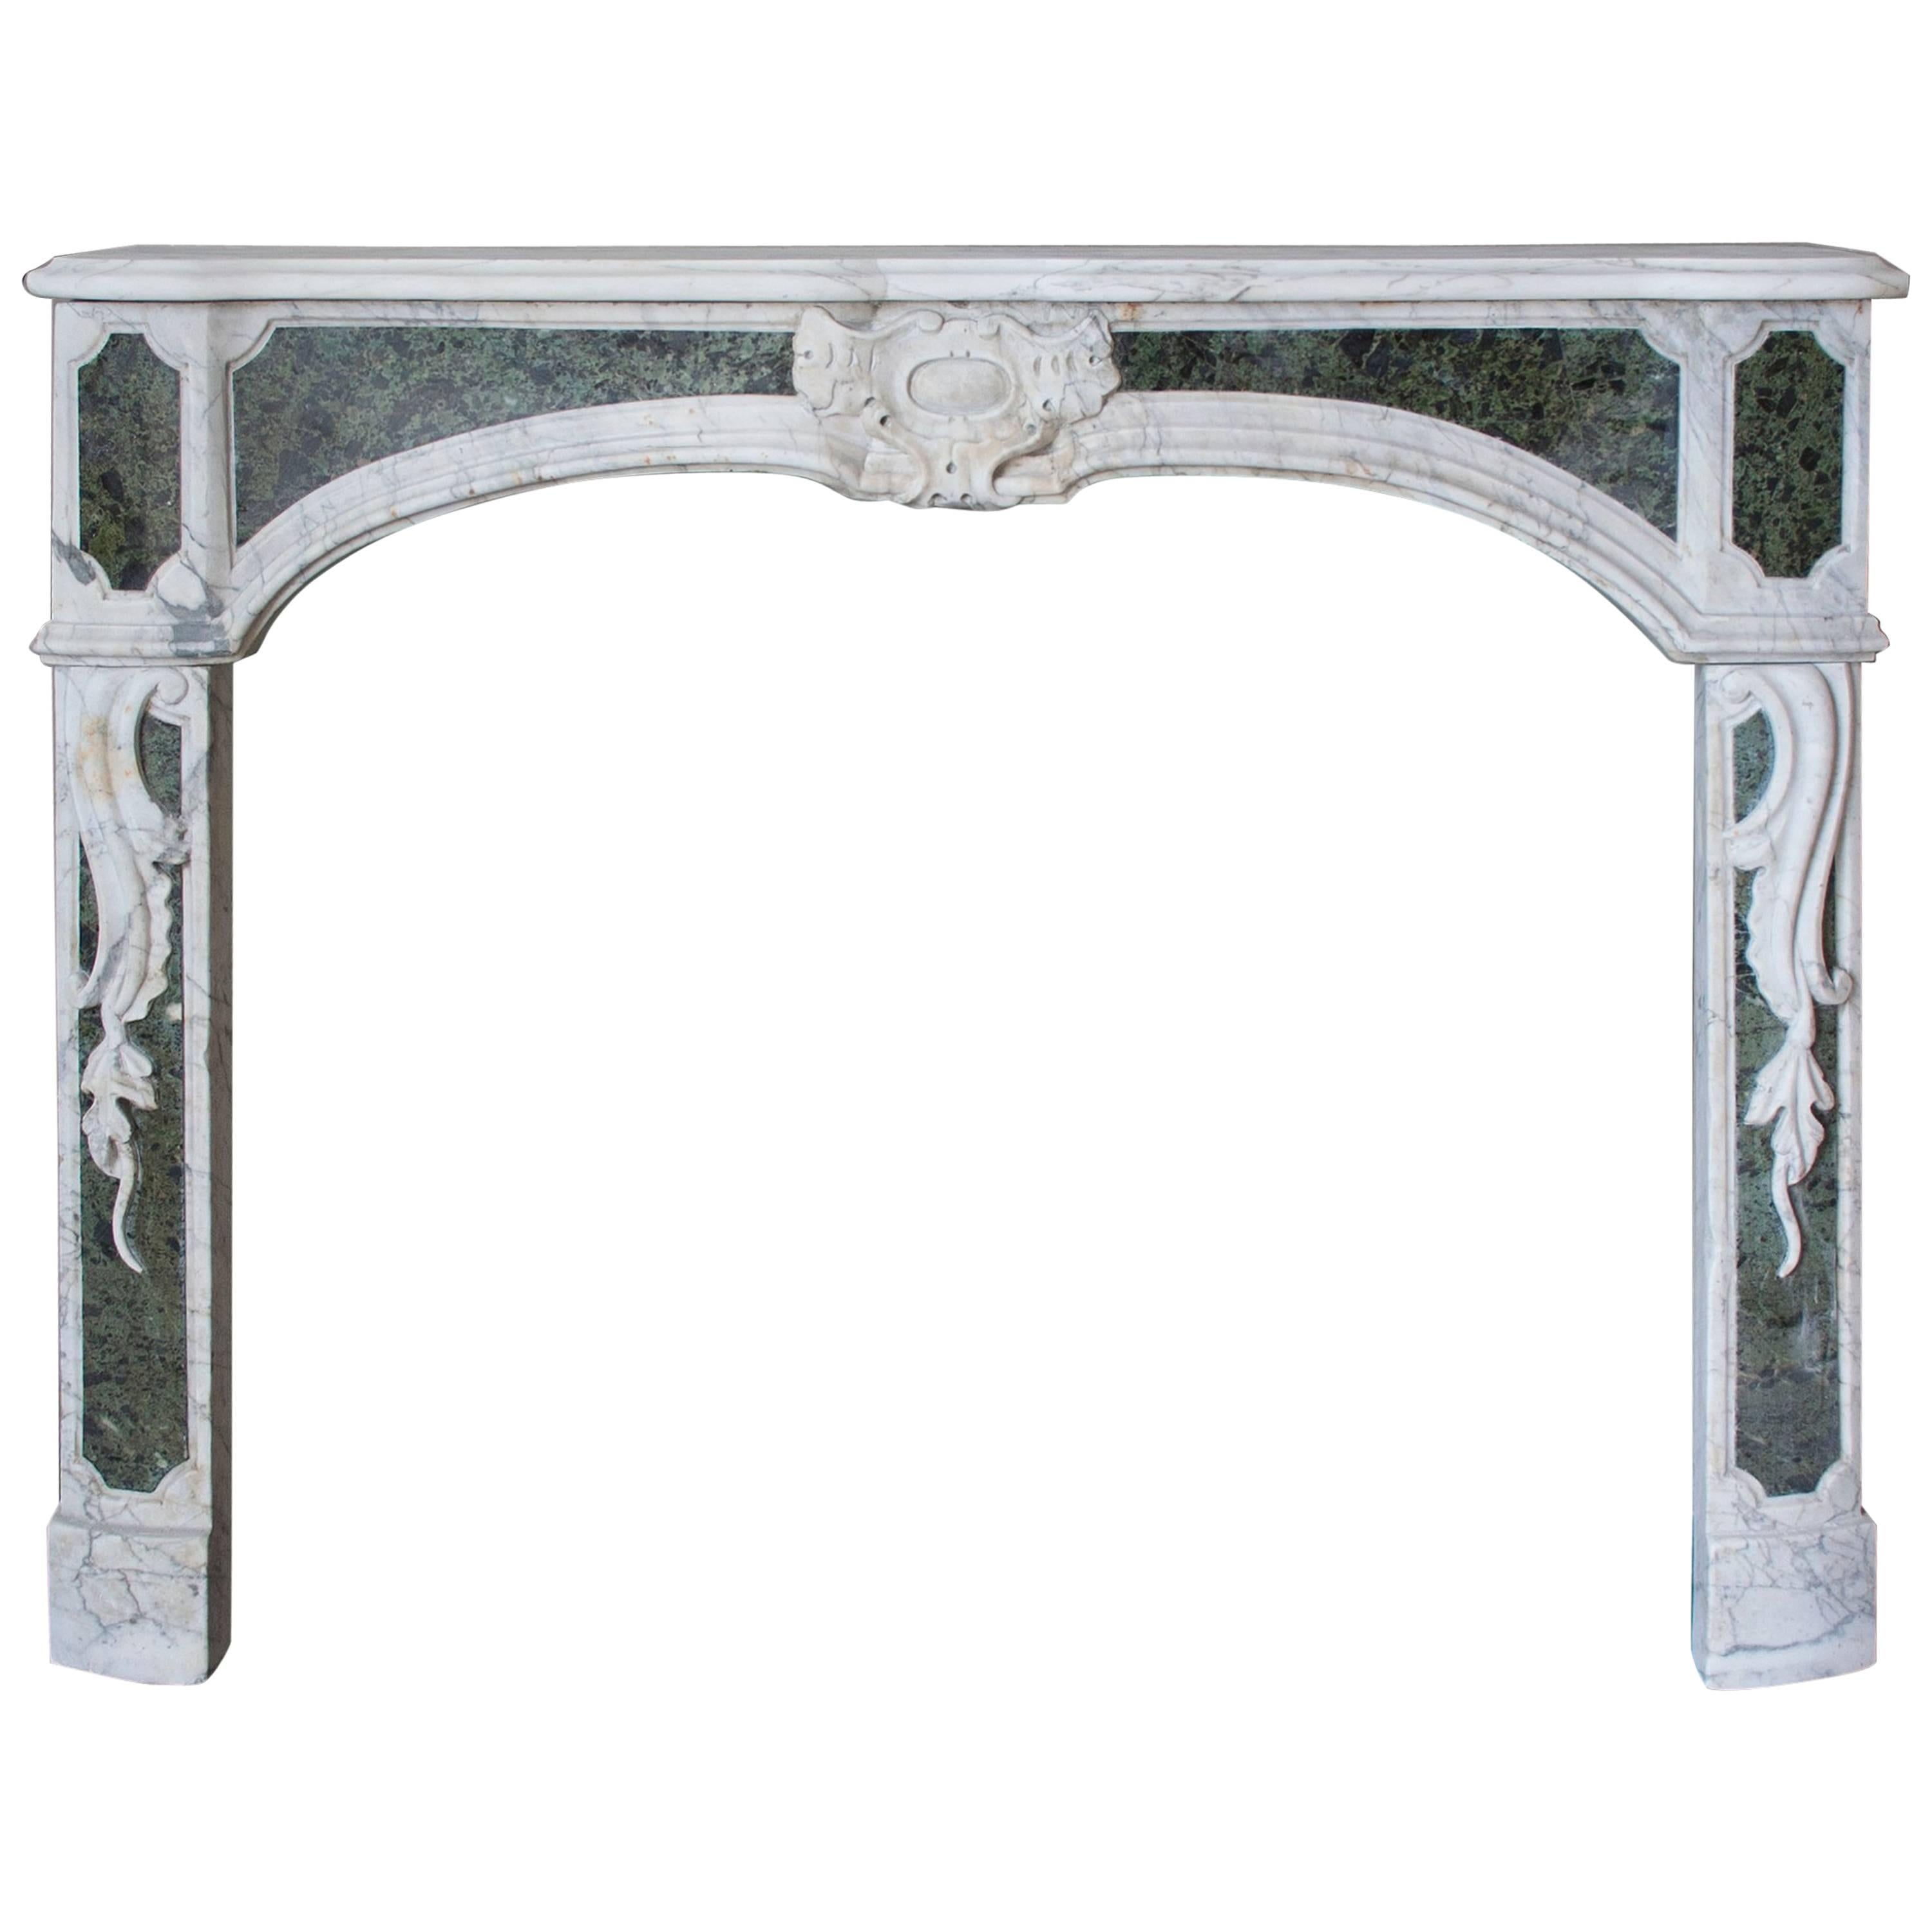 Louis XV Style Mantelpiece circa 1920 in Statuary Marble with Antico Verde